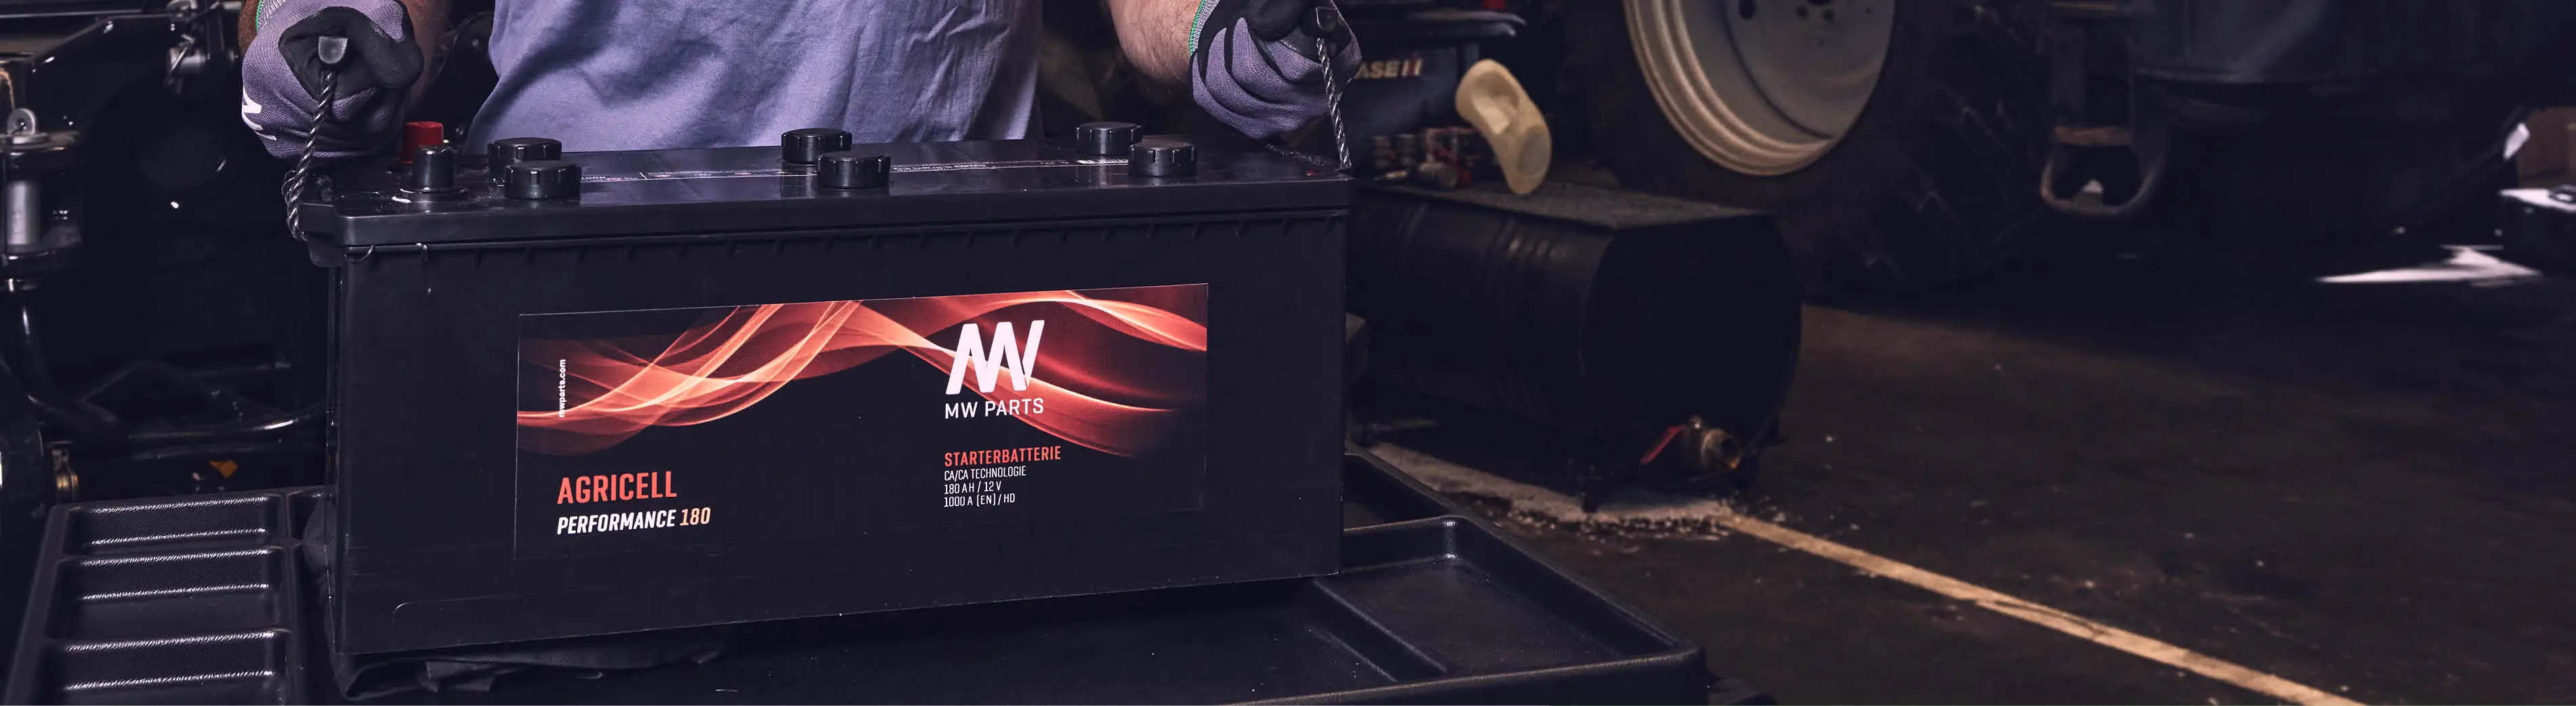 AGRICELL Performance - The battery for agricultural machinery